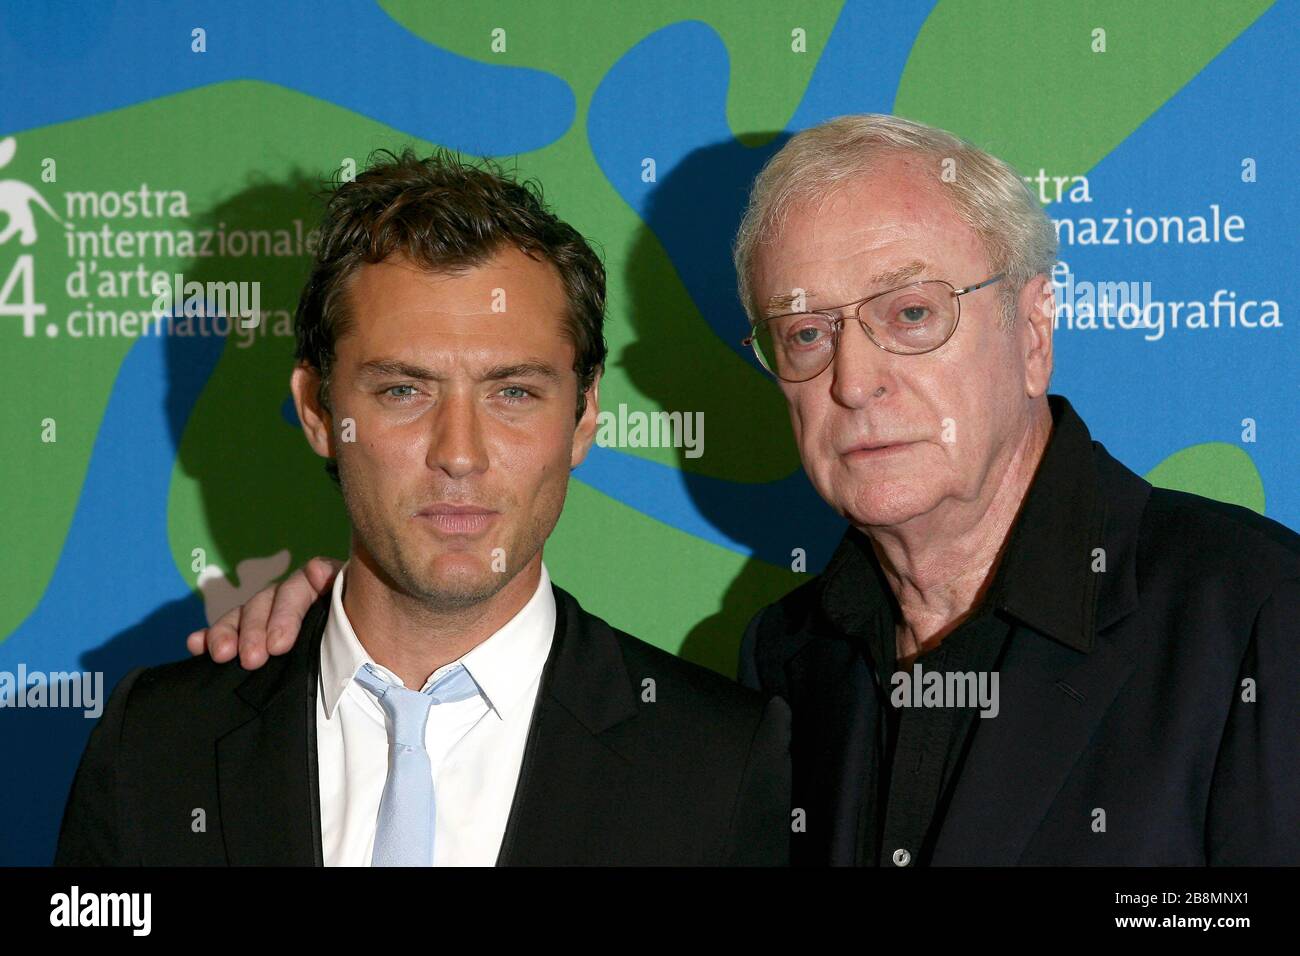 Venice, 30/08/2007. Jude Law and Michael Caine attending the photocall for the film 'Sleuth' directed by Kenneth Branagh. Stock Photo